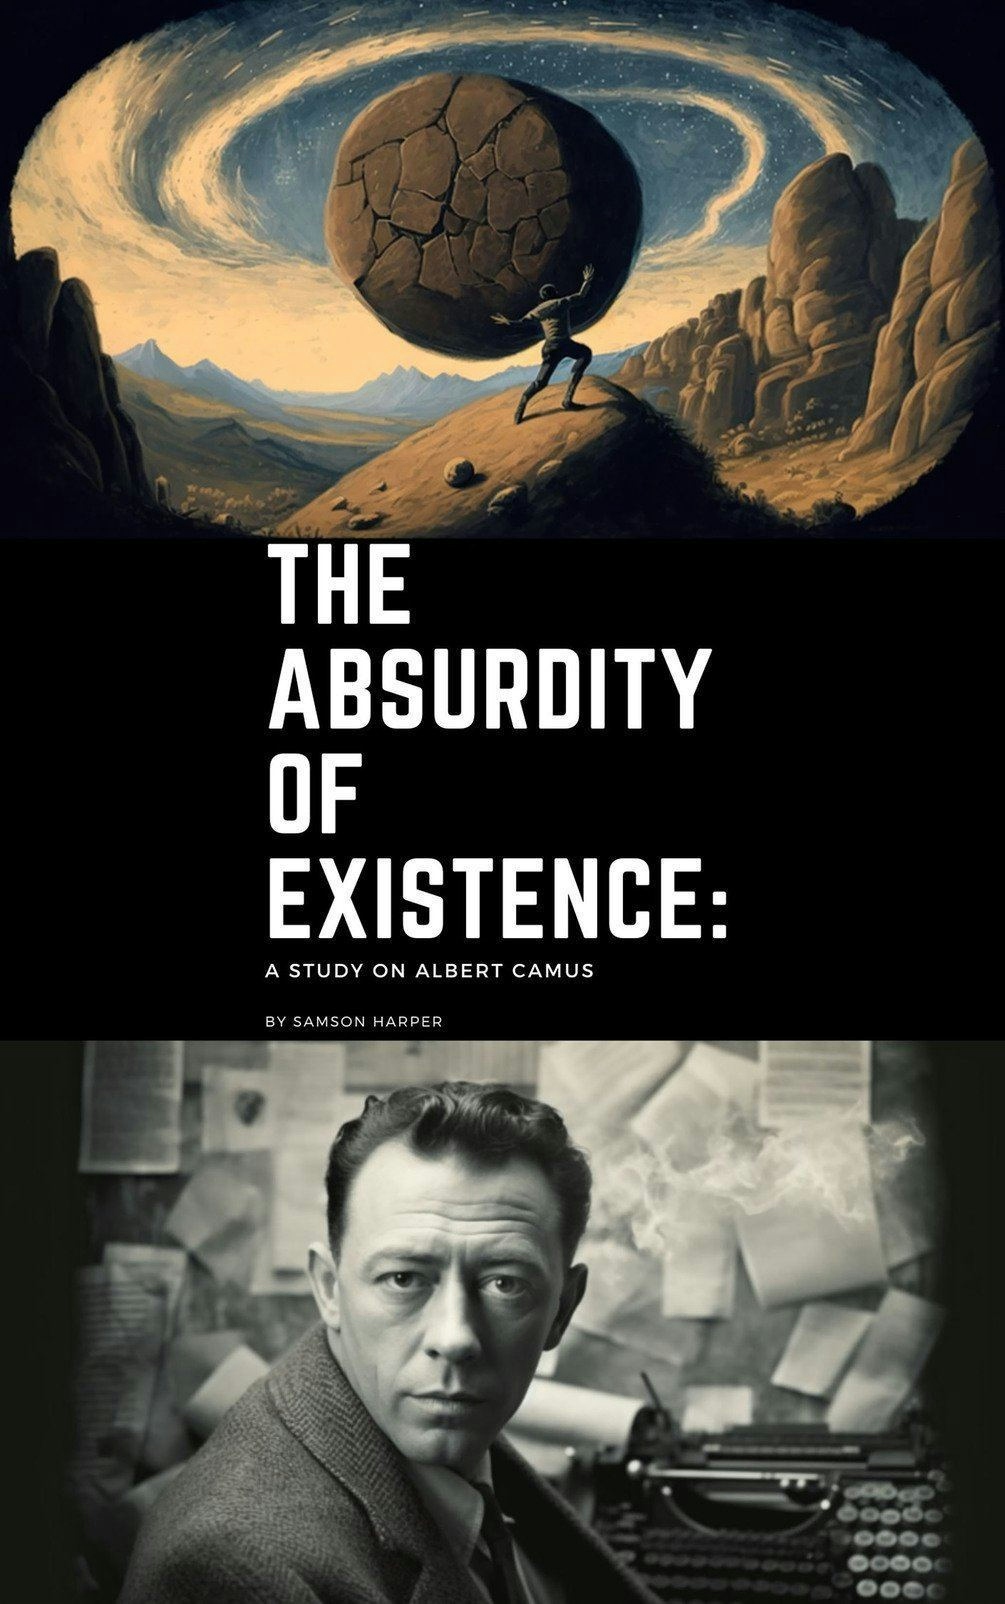 The Absurdity of Existence: A Study on Albert Camus